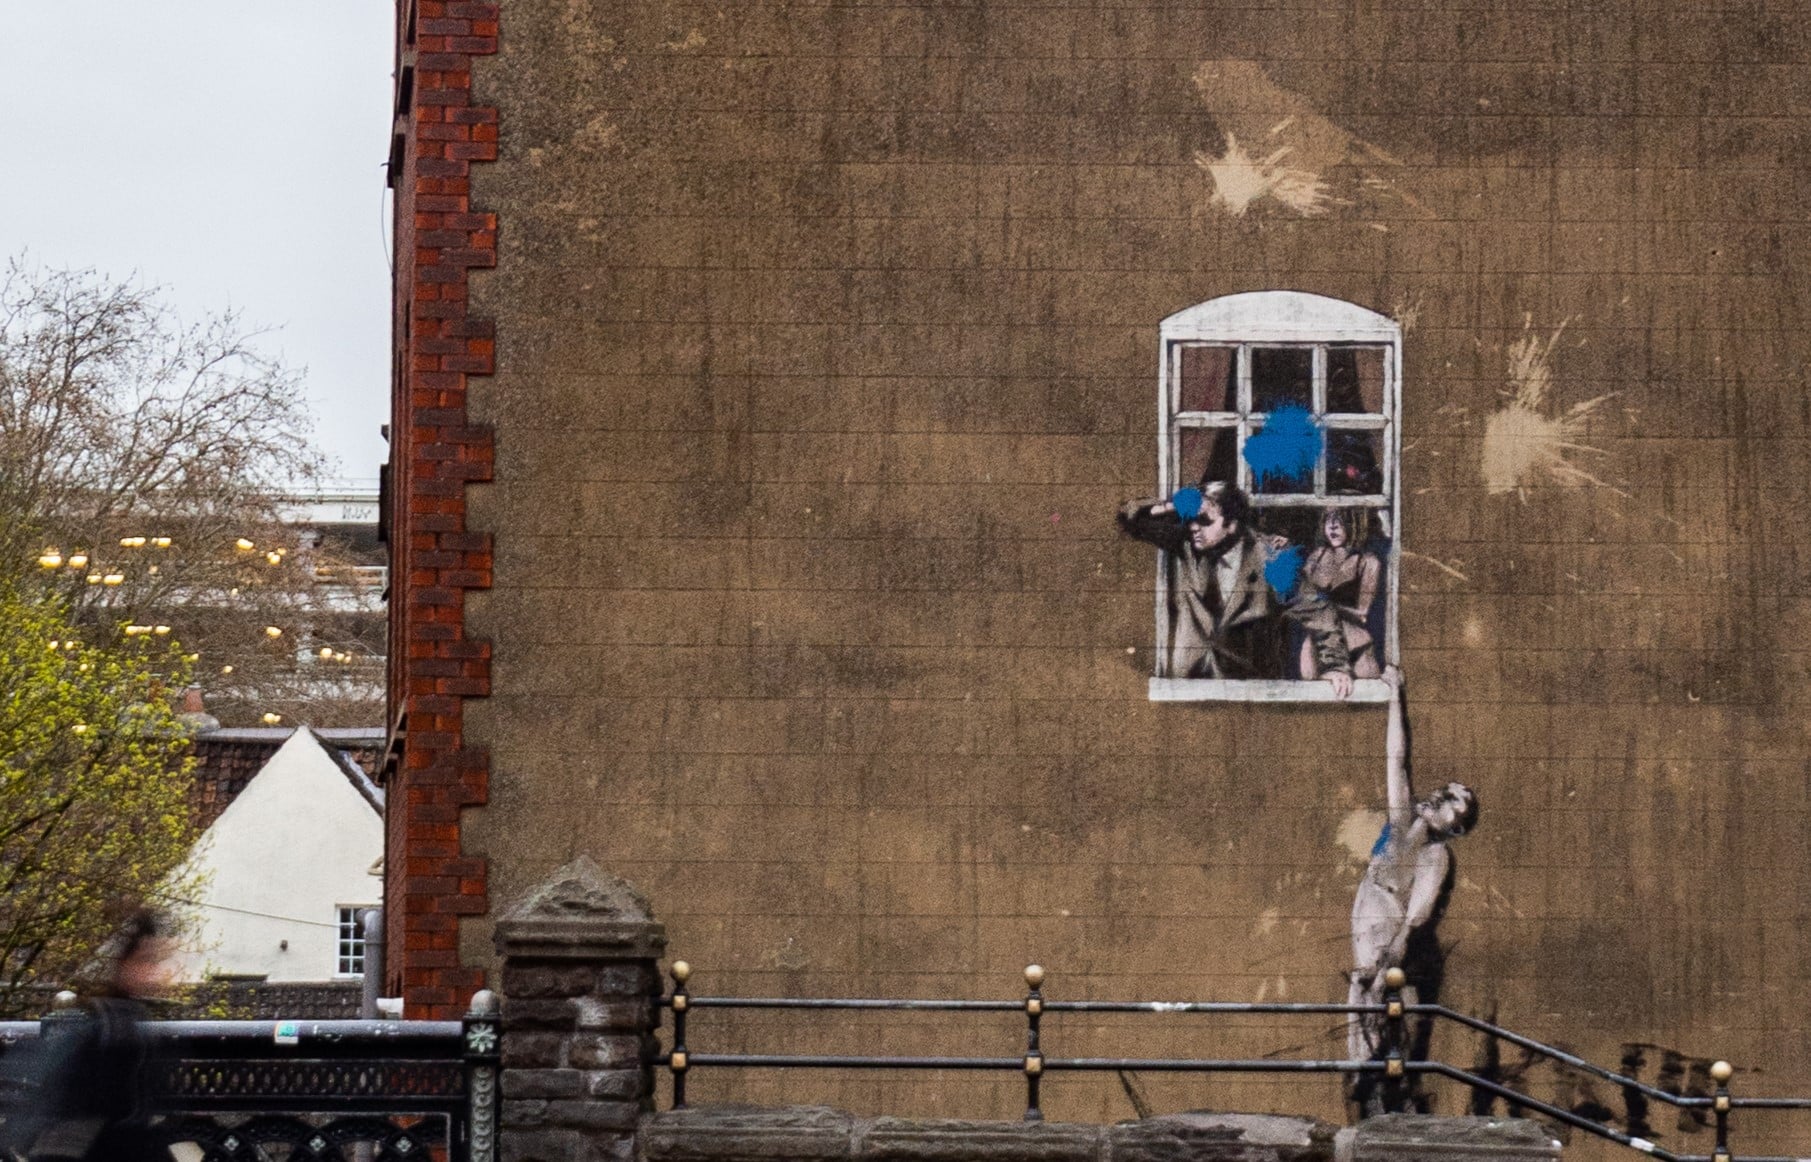 View from across the street of one of Banksy's artwork, Well Hung Lover.